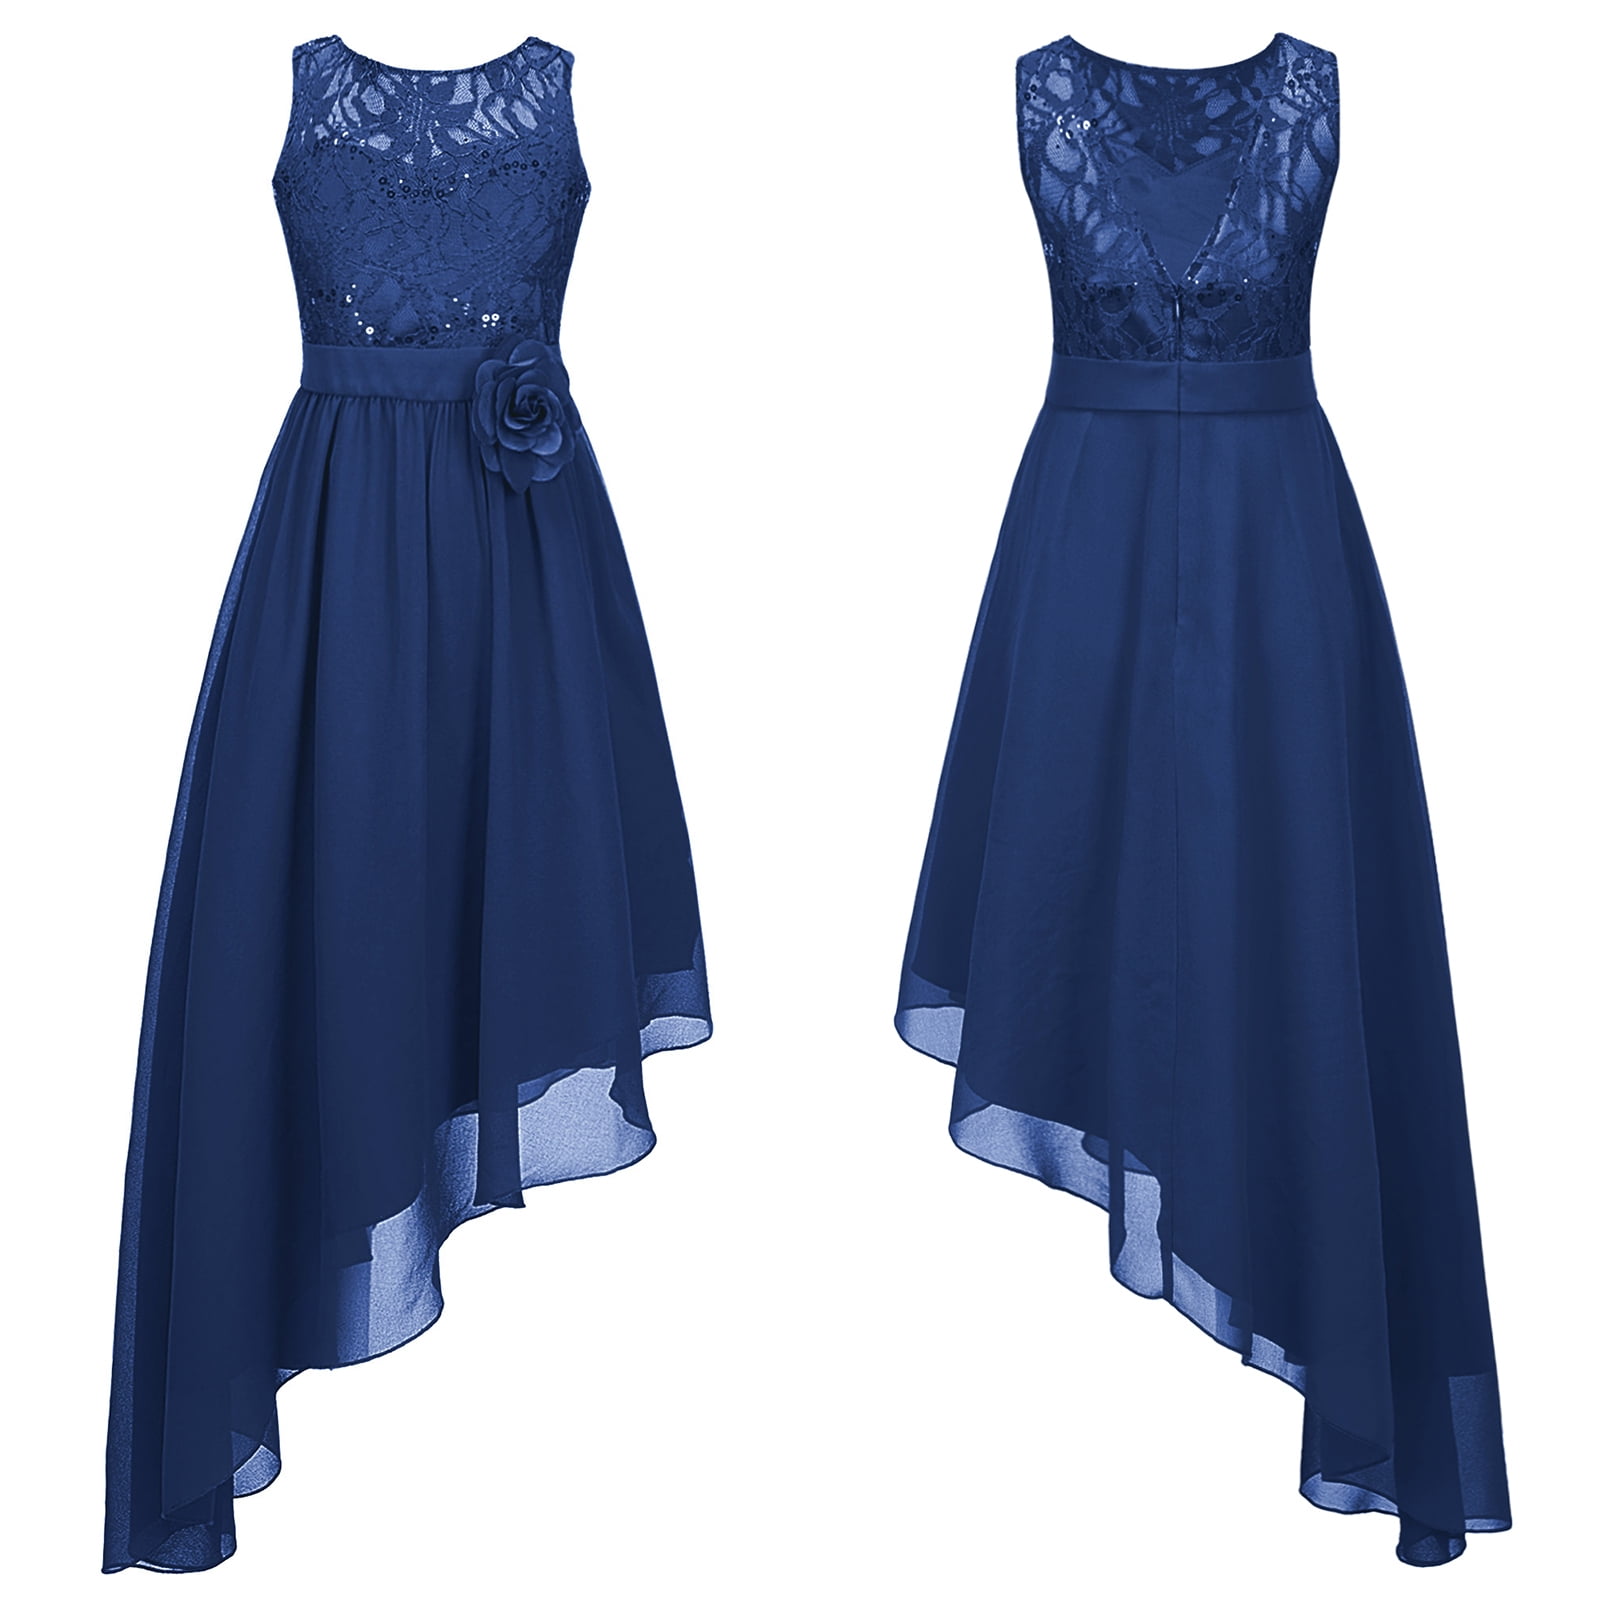 YONGHS Kids Girls Junior Bridesmaid Dress Party Proms Gown 6-16 Navy Blue 12